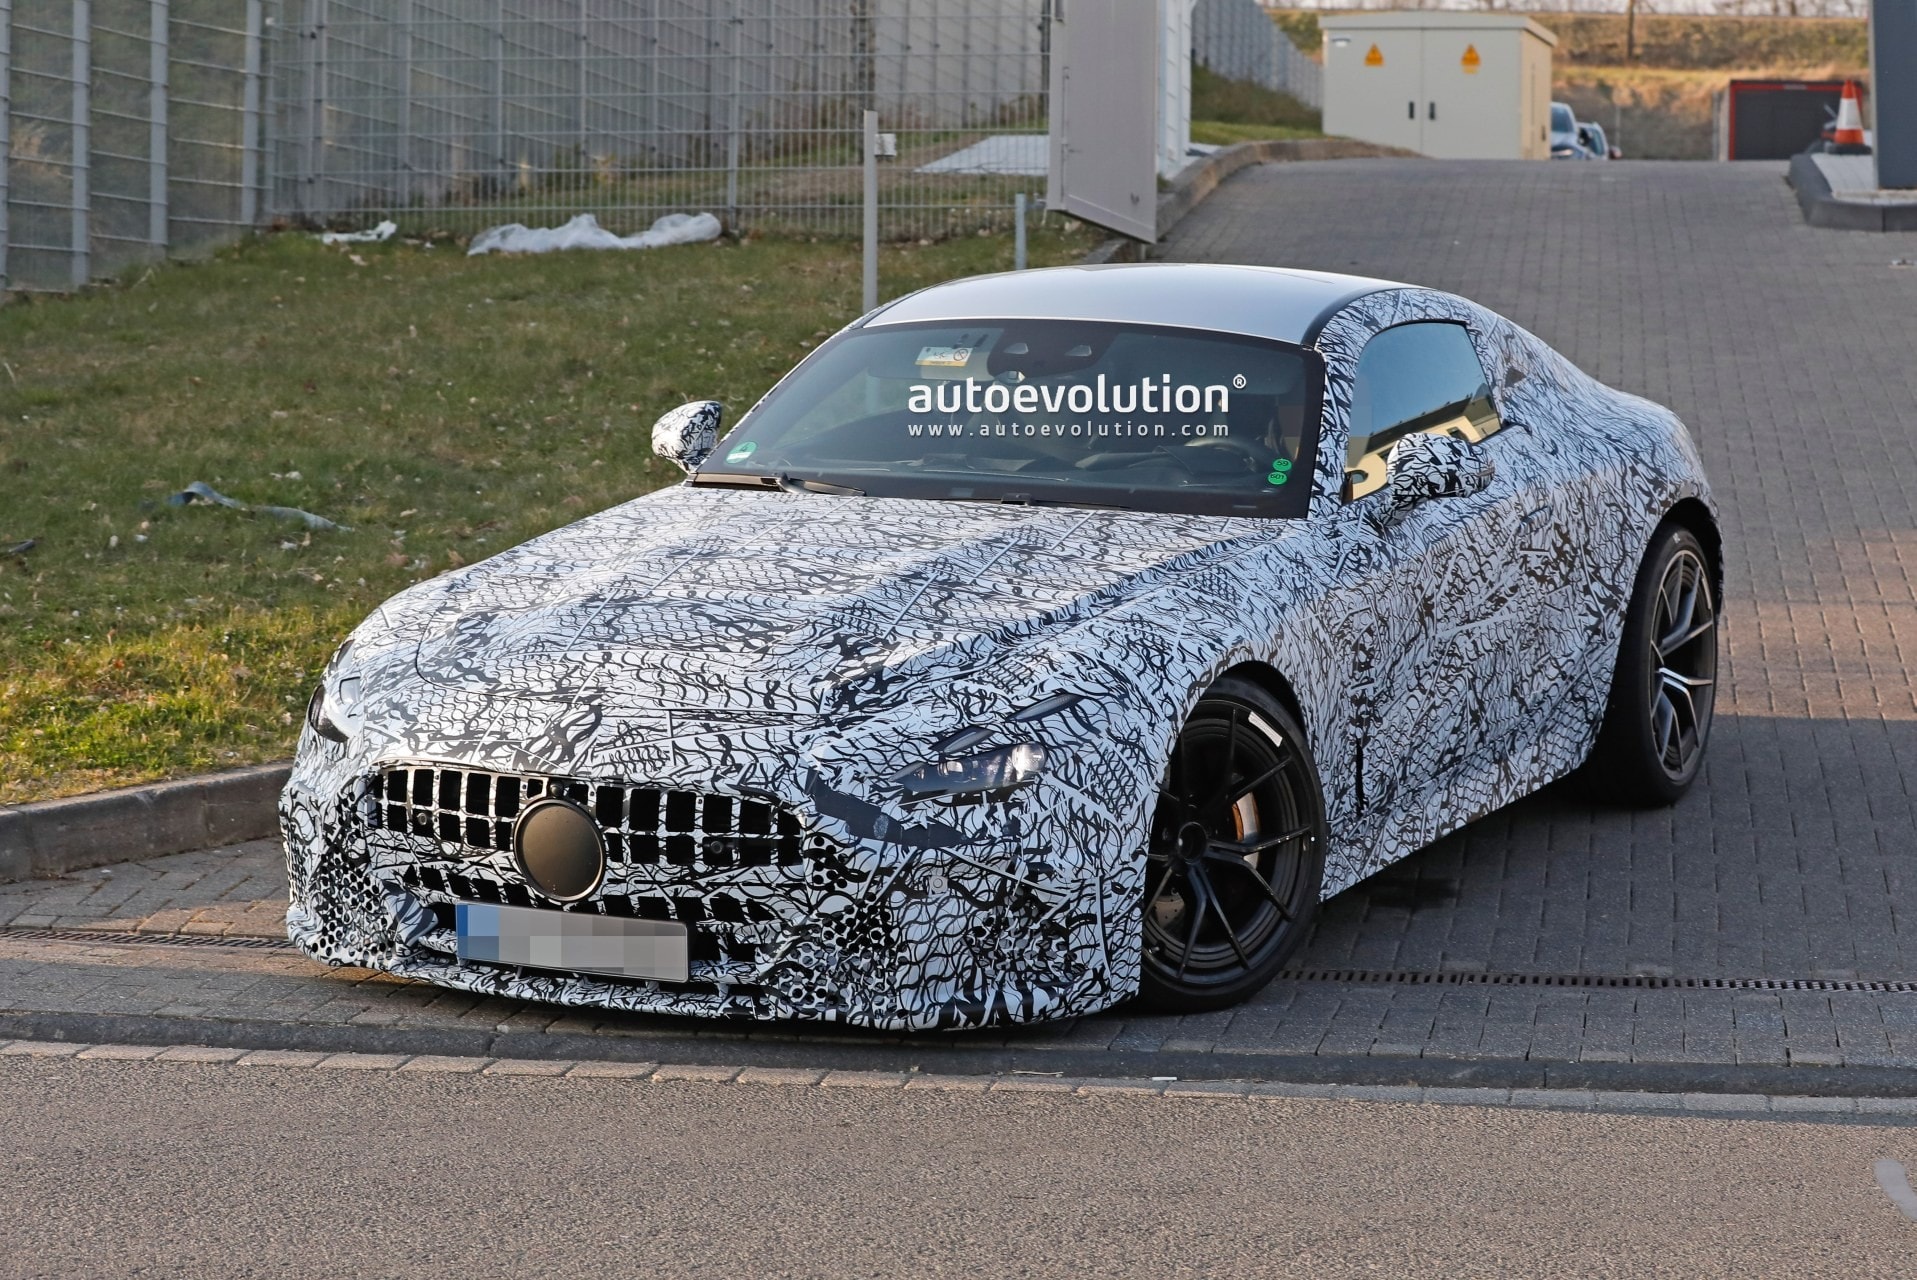 https://s1.cdn.autoevolution.com/images/news/2023-mercedes-amg-gt-prototype-spied-near-the-nurburgring-in-full-camouflage-185524_1.jpg